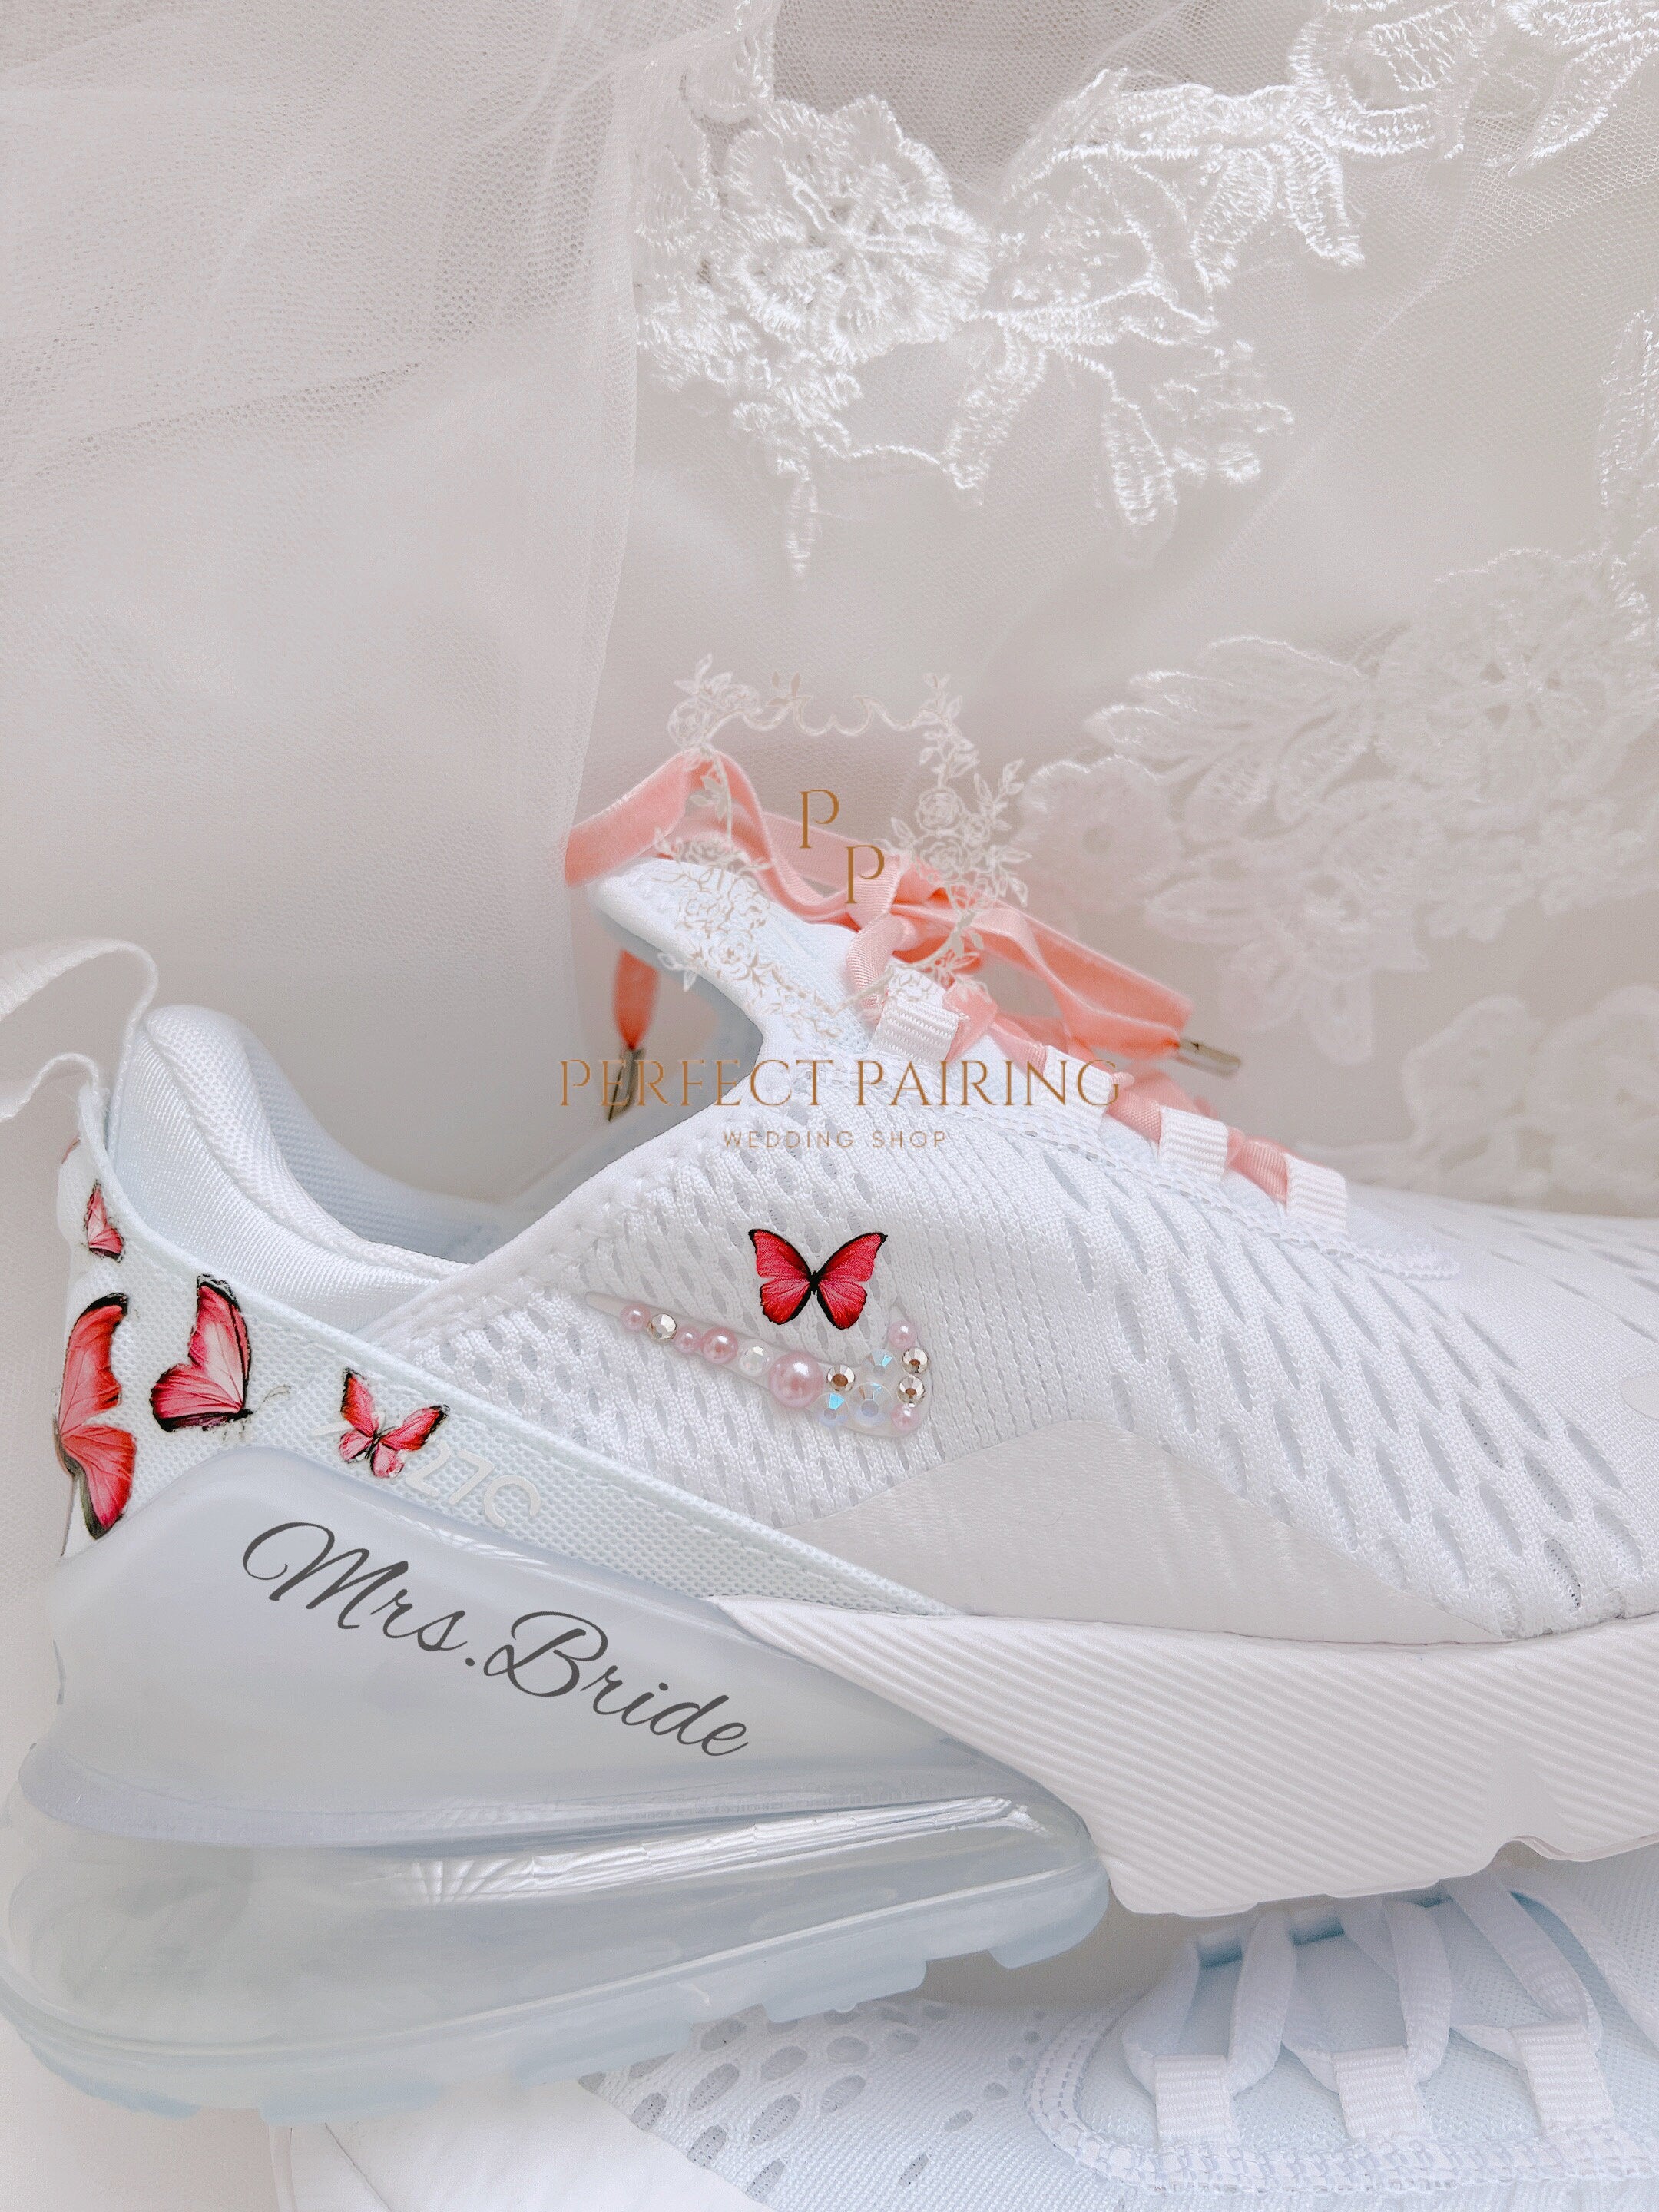 Wedding Shoes Custom Nike Air Max 270 Red Butterfly